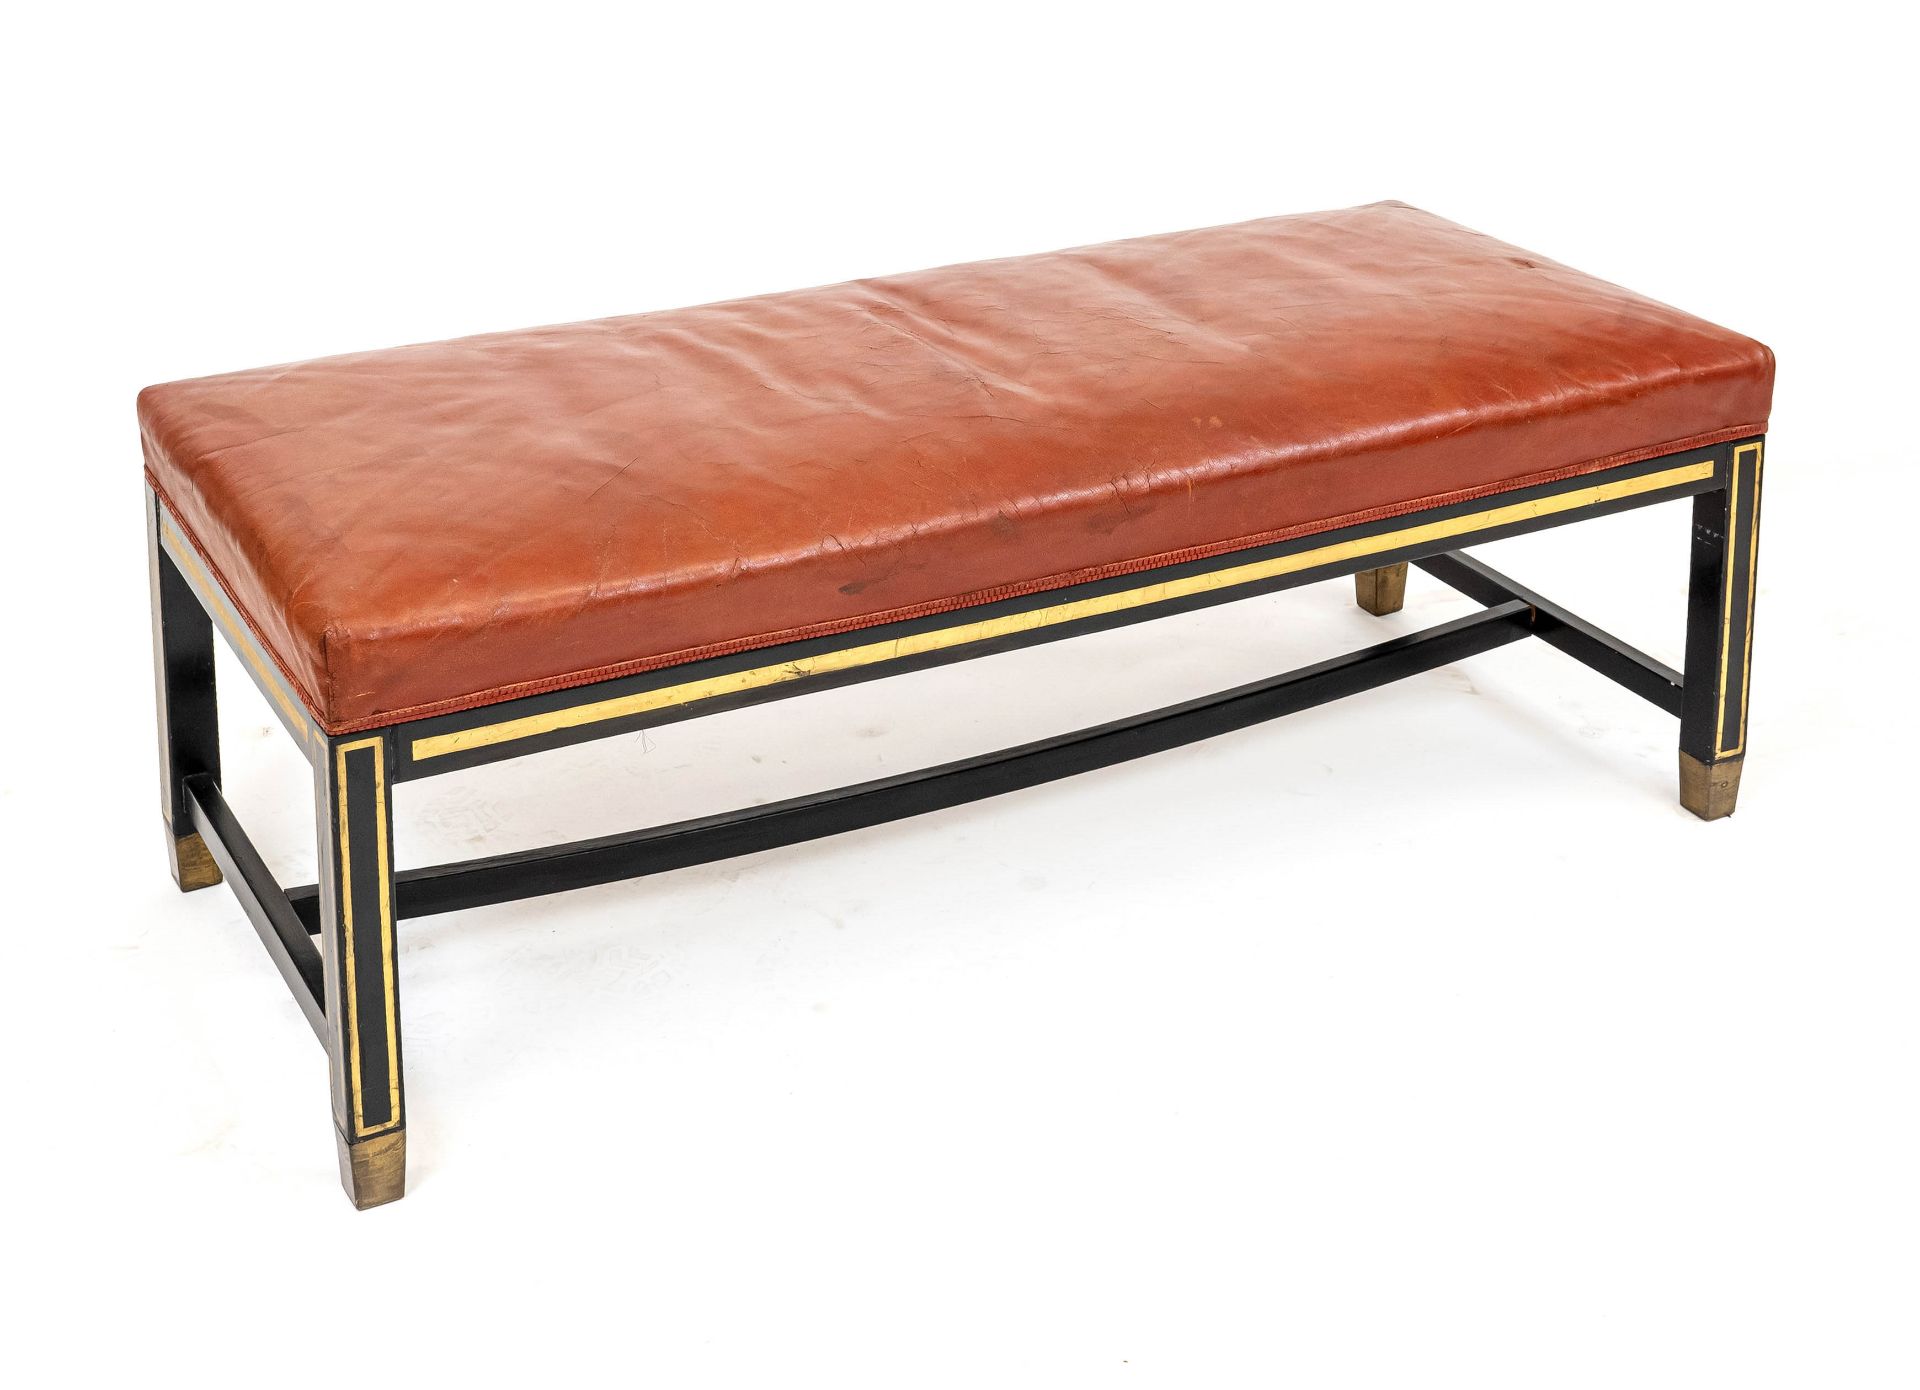 Bench, early 20th c., wood ebonized, red leather upholstery, 45 x 120 x 50 cm.